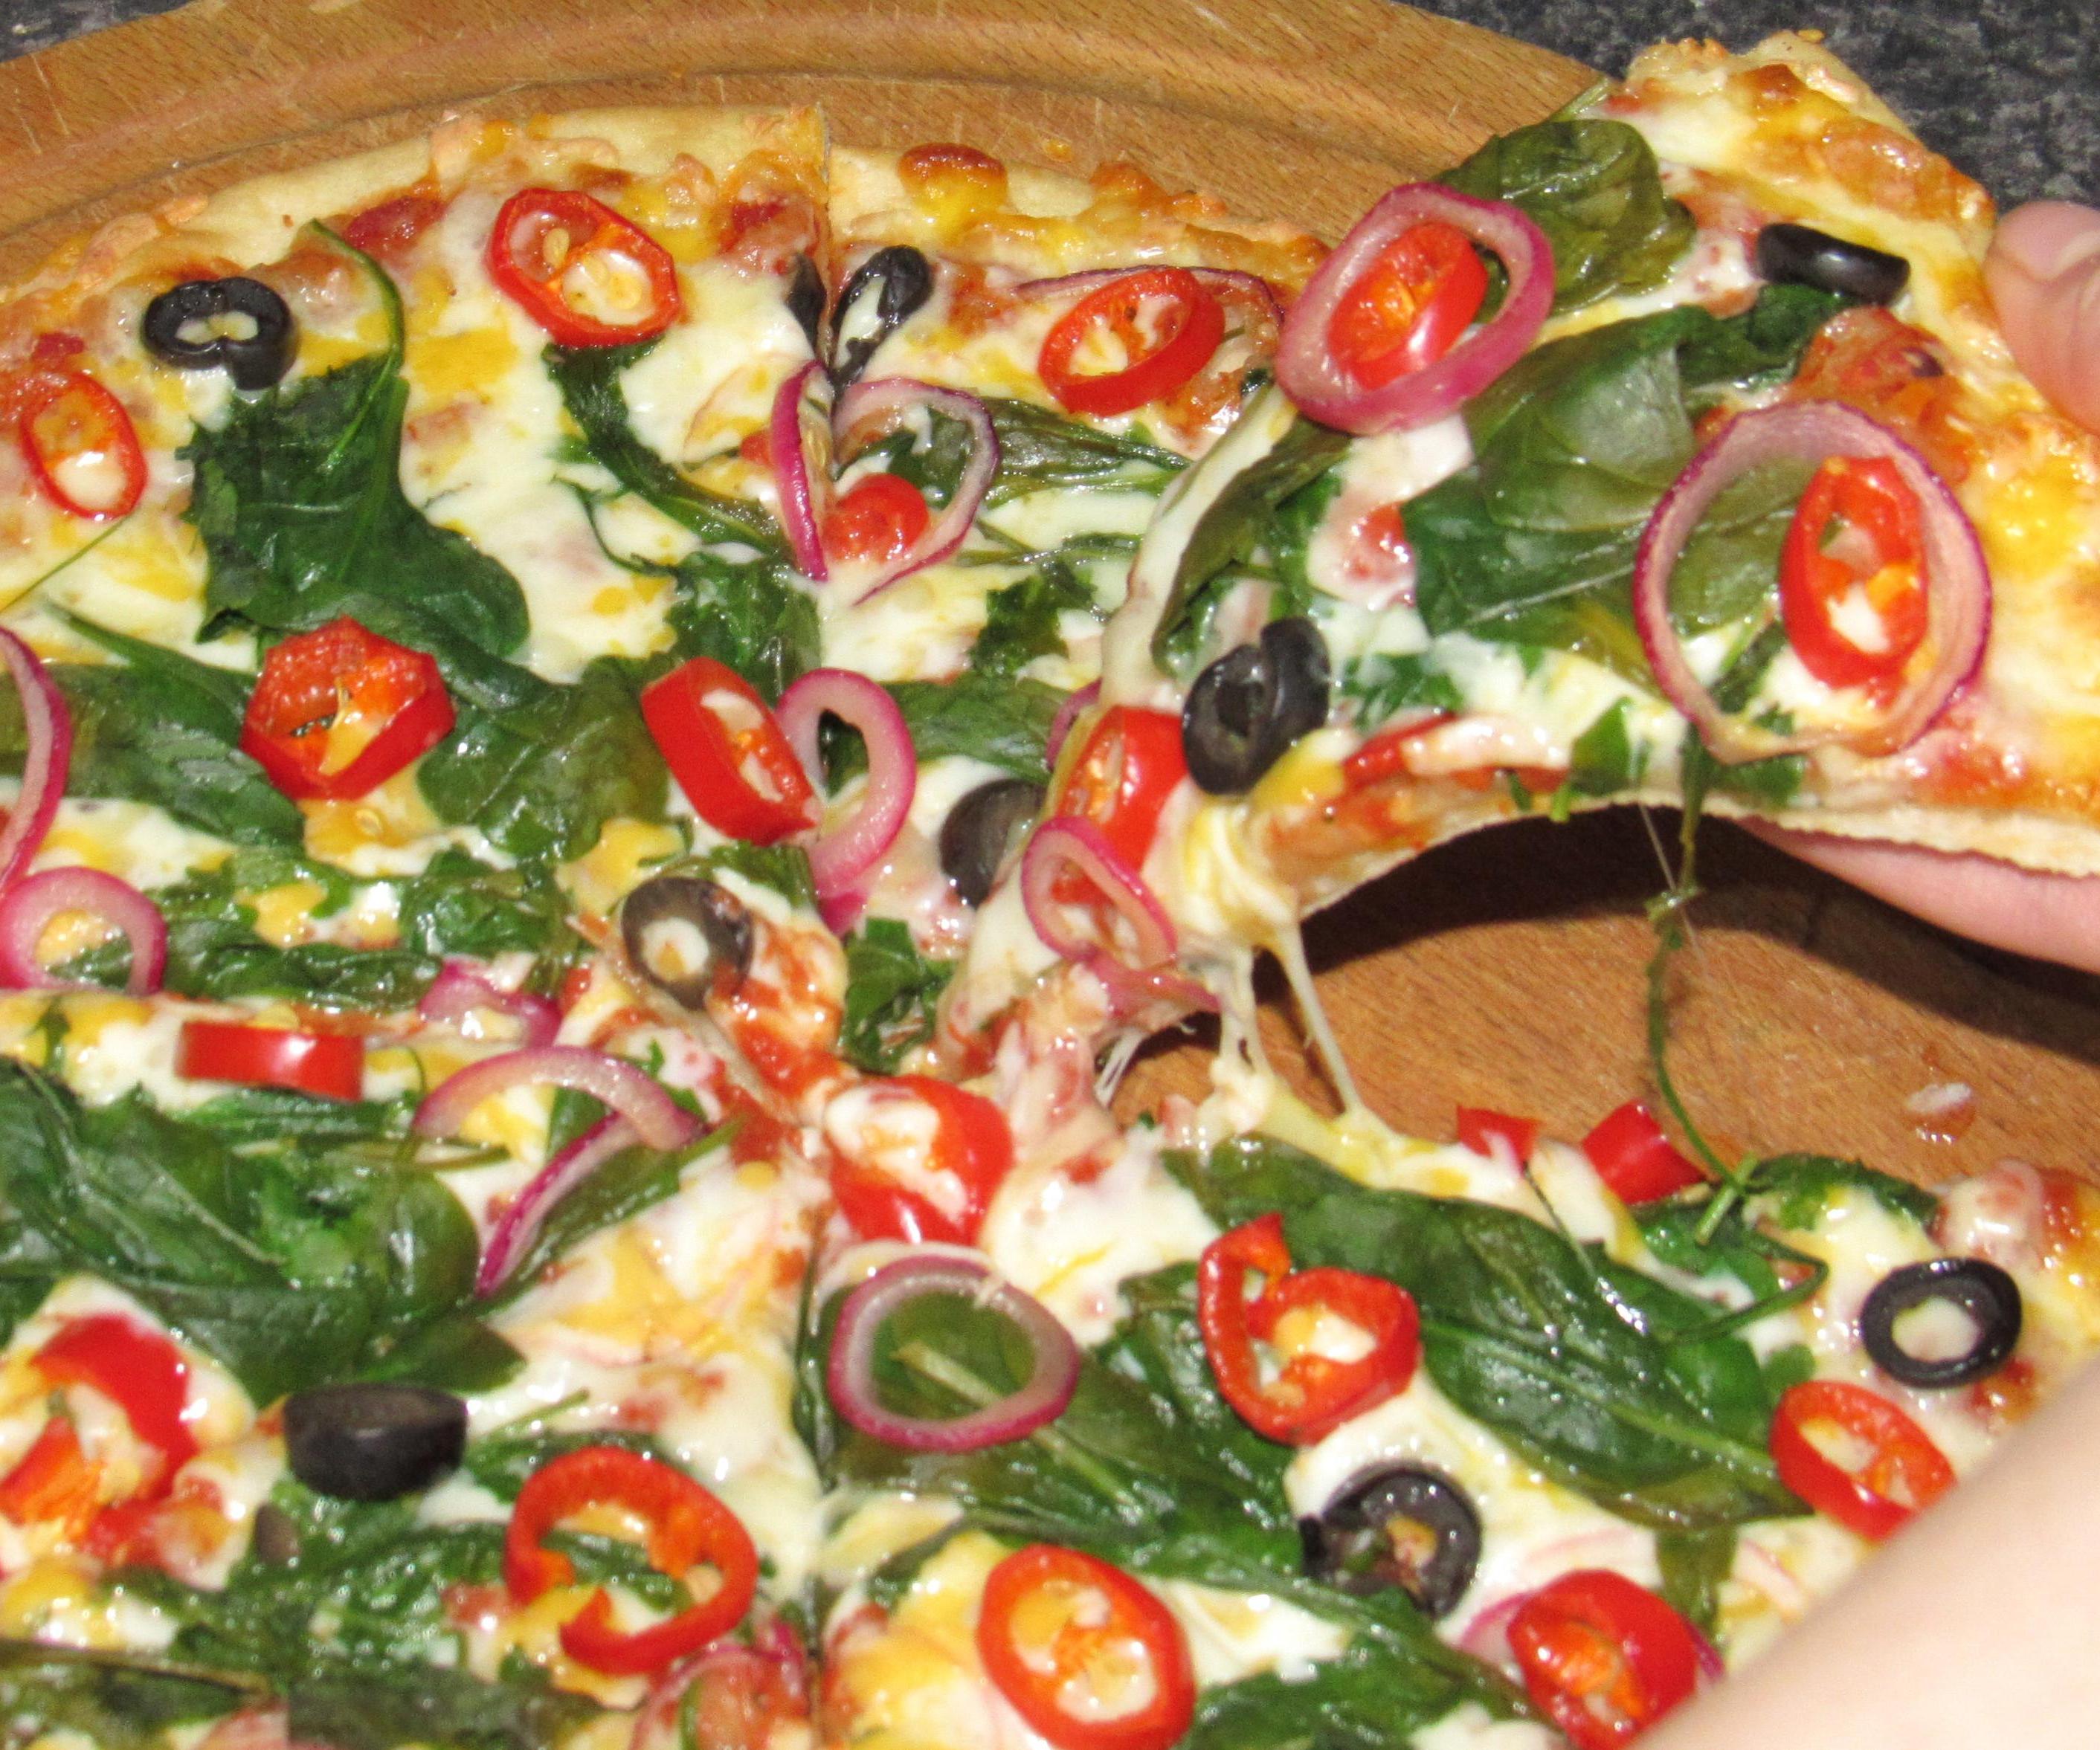 Spinach and Rocket Pizza From a Frozen Four Cheese Pizza